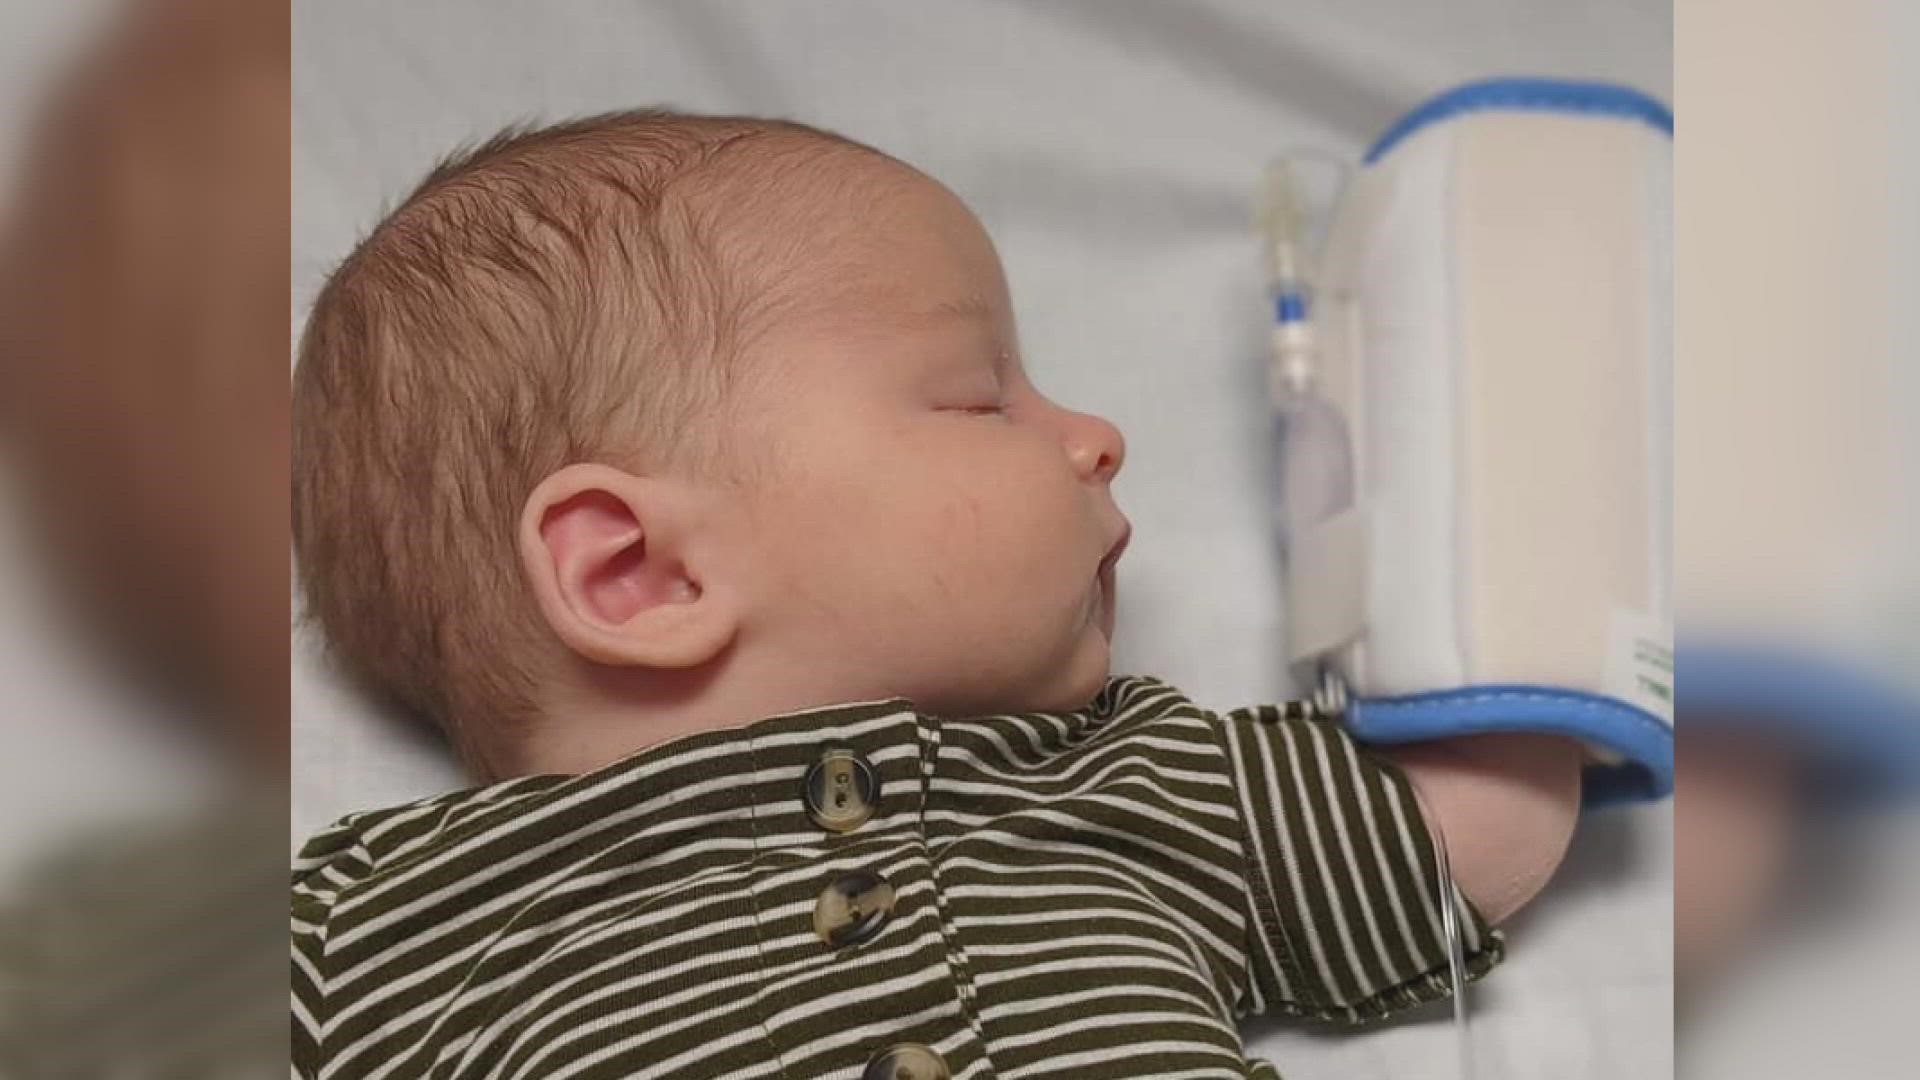 Doctors diagnosed Grant with a rare genetic disease after a newborn screening. He was actually the first baby in Indiana diagnosed with Pompe disease.